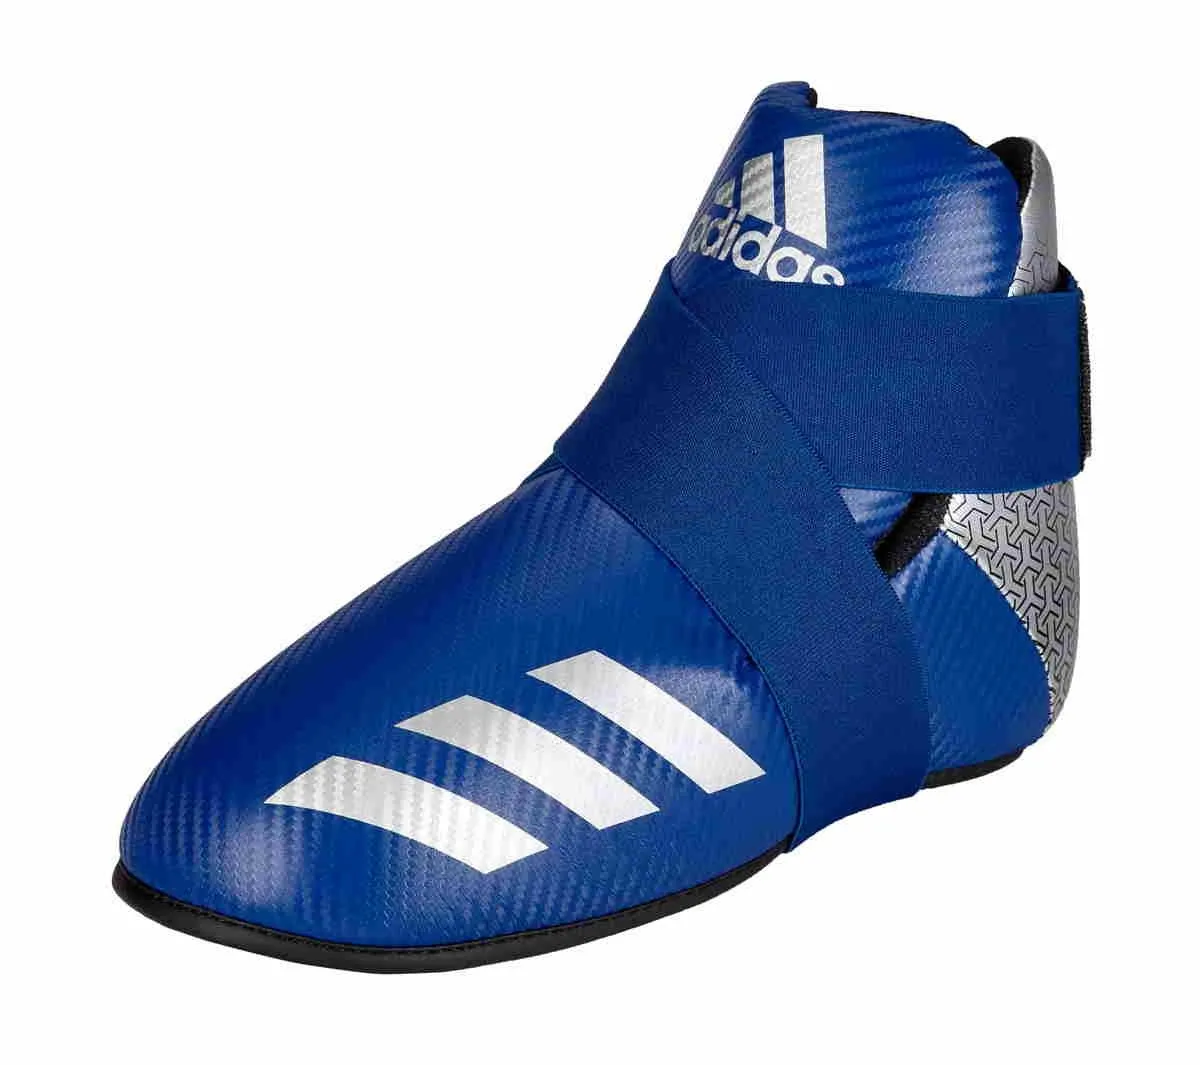 adidas Pro Kickboxing Foot Protection 300 blue|silver